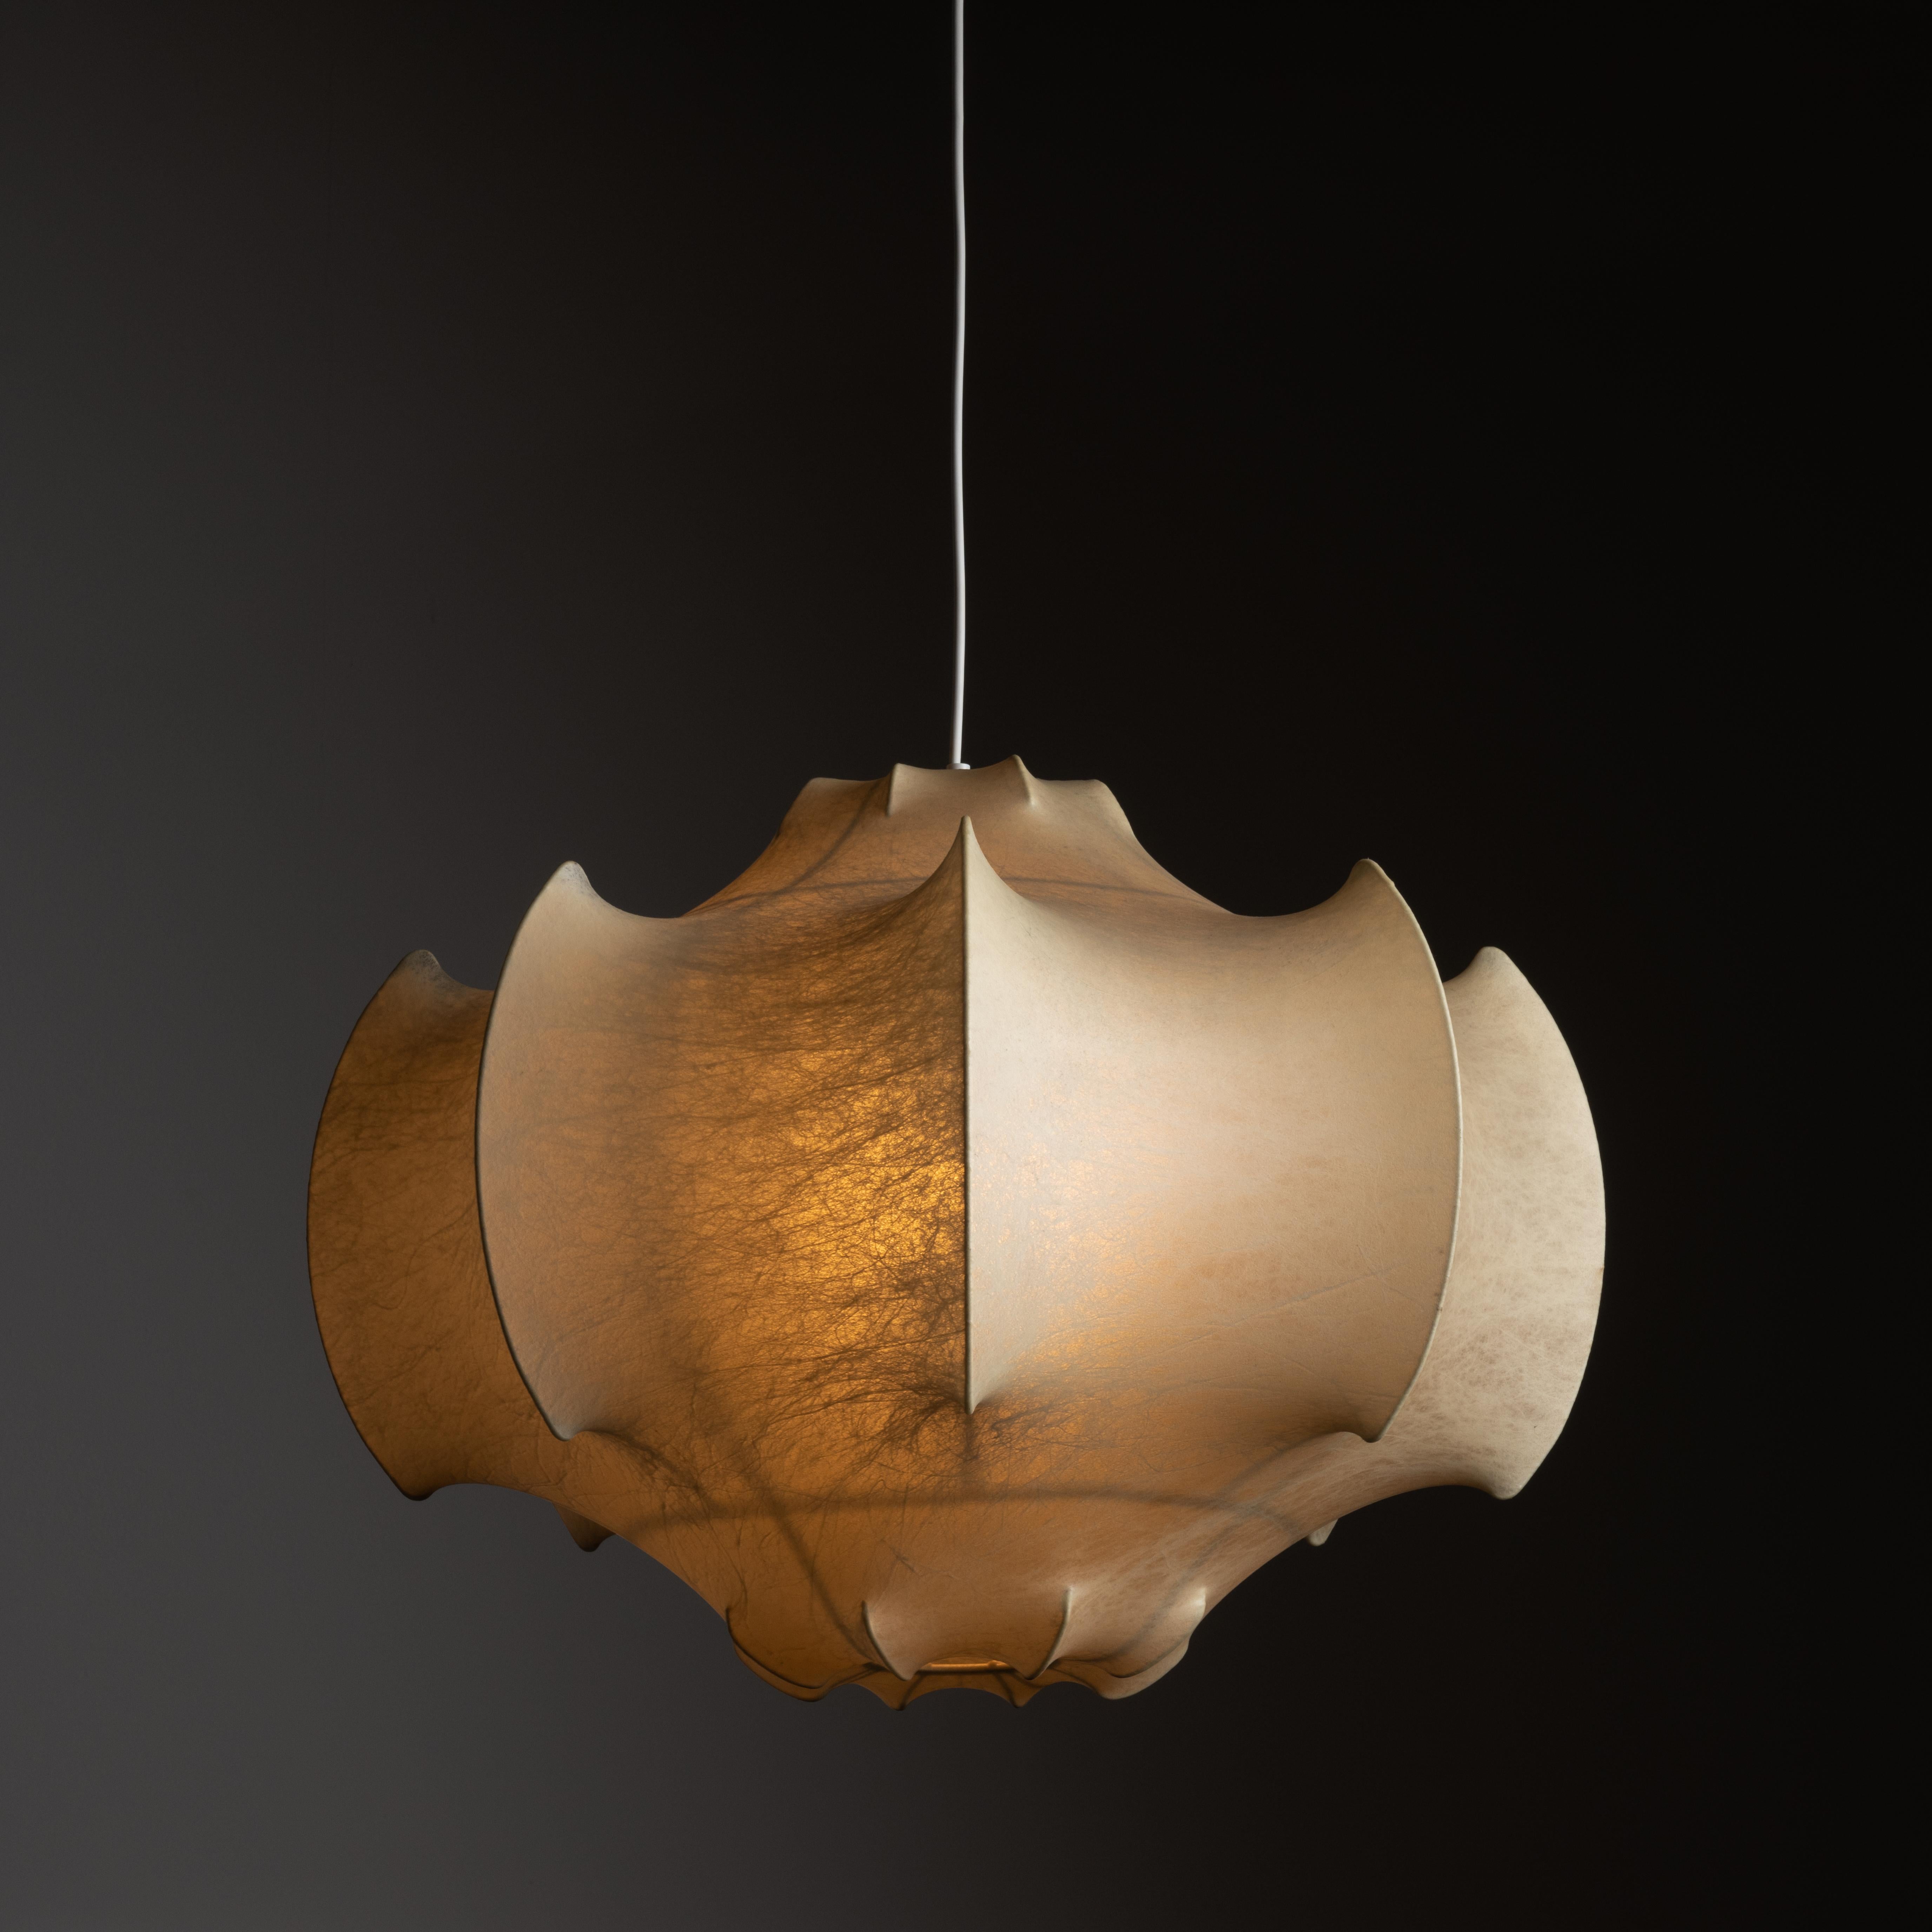 First edition Viscontea suspension light by Achille & Pier Castiglioni for Flos. Designed and manufactured in Italy, circa 1960s. Iconic fiberous pendant by Flos. Resin, steel, custom brass backplate. Wired for U.S. standards. We recommend one E27